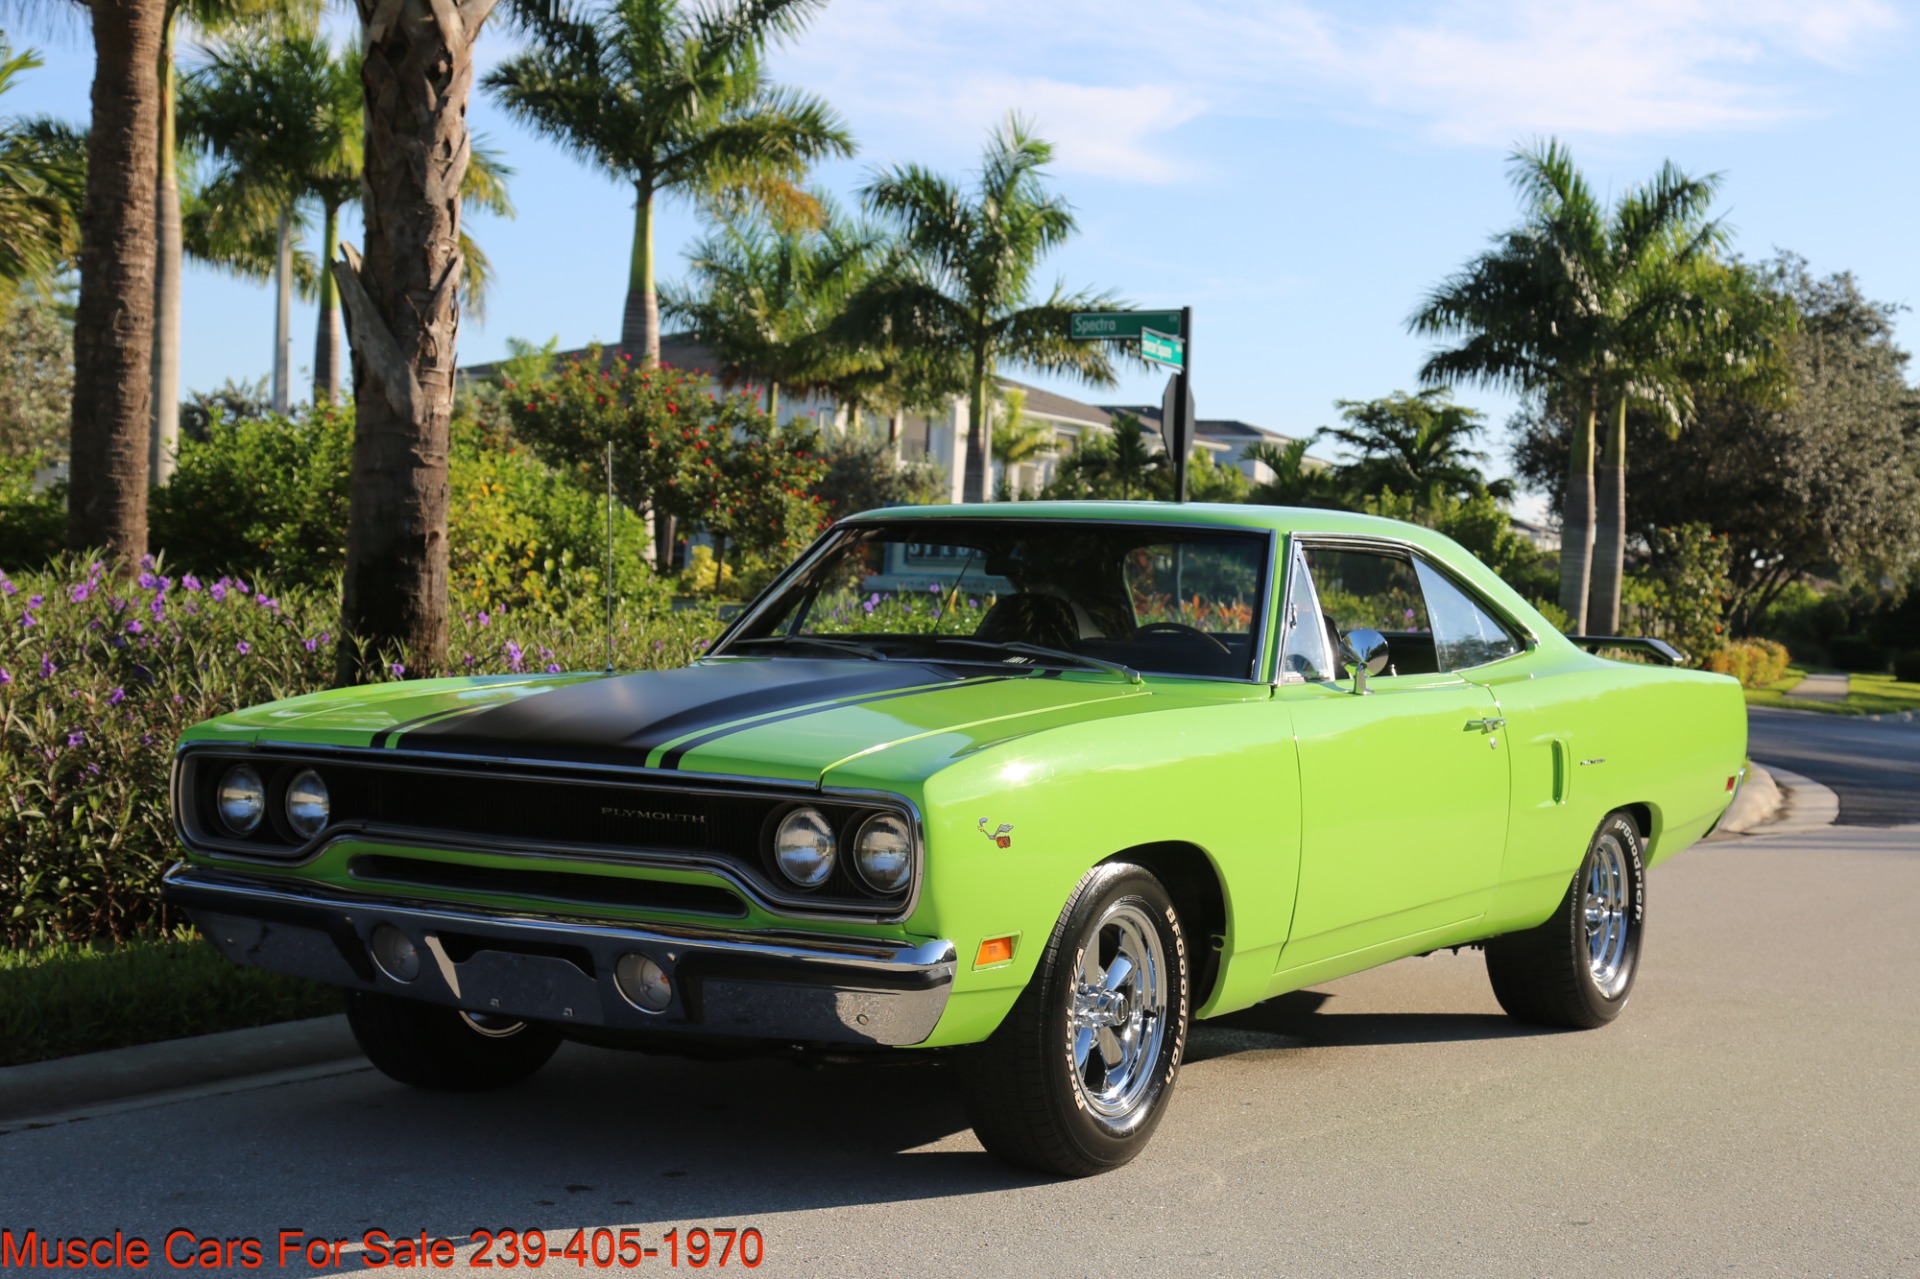 Used 1970 Plymouth Road Runner Road Runner 440 4 Speed For Sale 55 000 Muscle Cars For Sale Inc Stock 2222